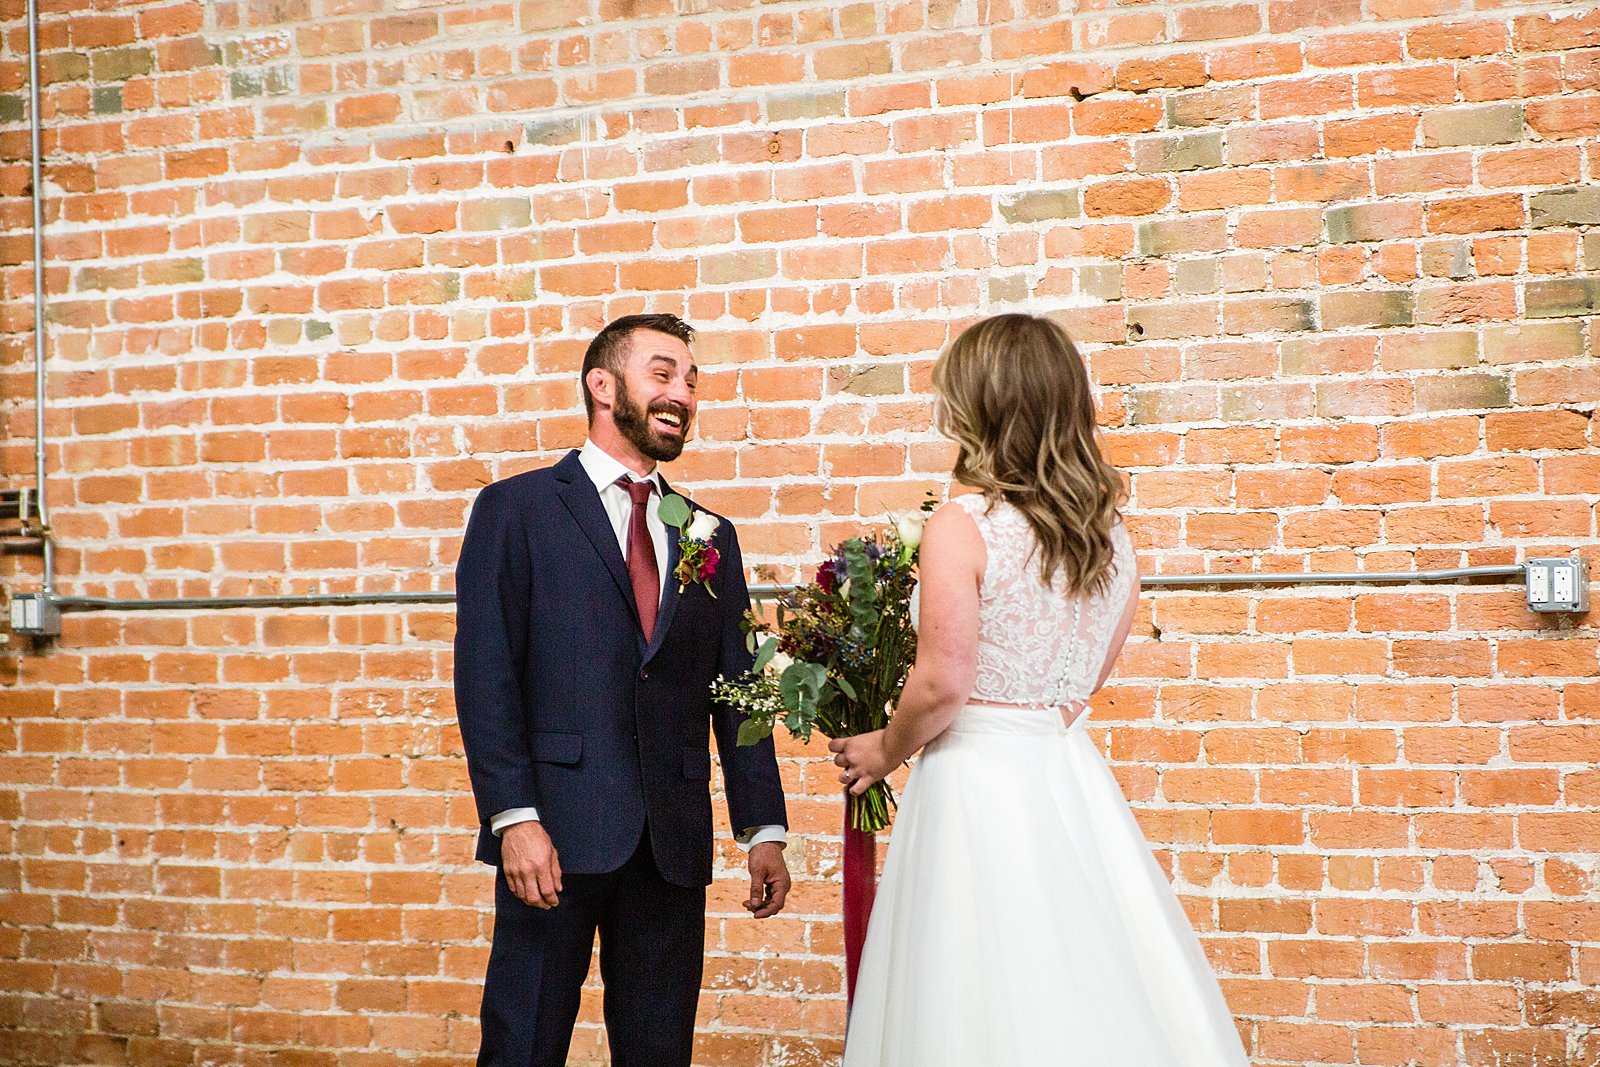 Bride and Groom share an intimate moment during their first look at Sunkist Warehouse by Phoenix wedding photographer PMA Photography.